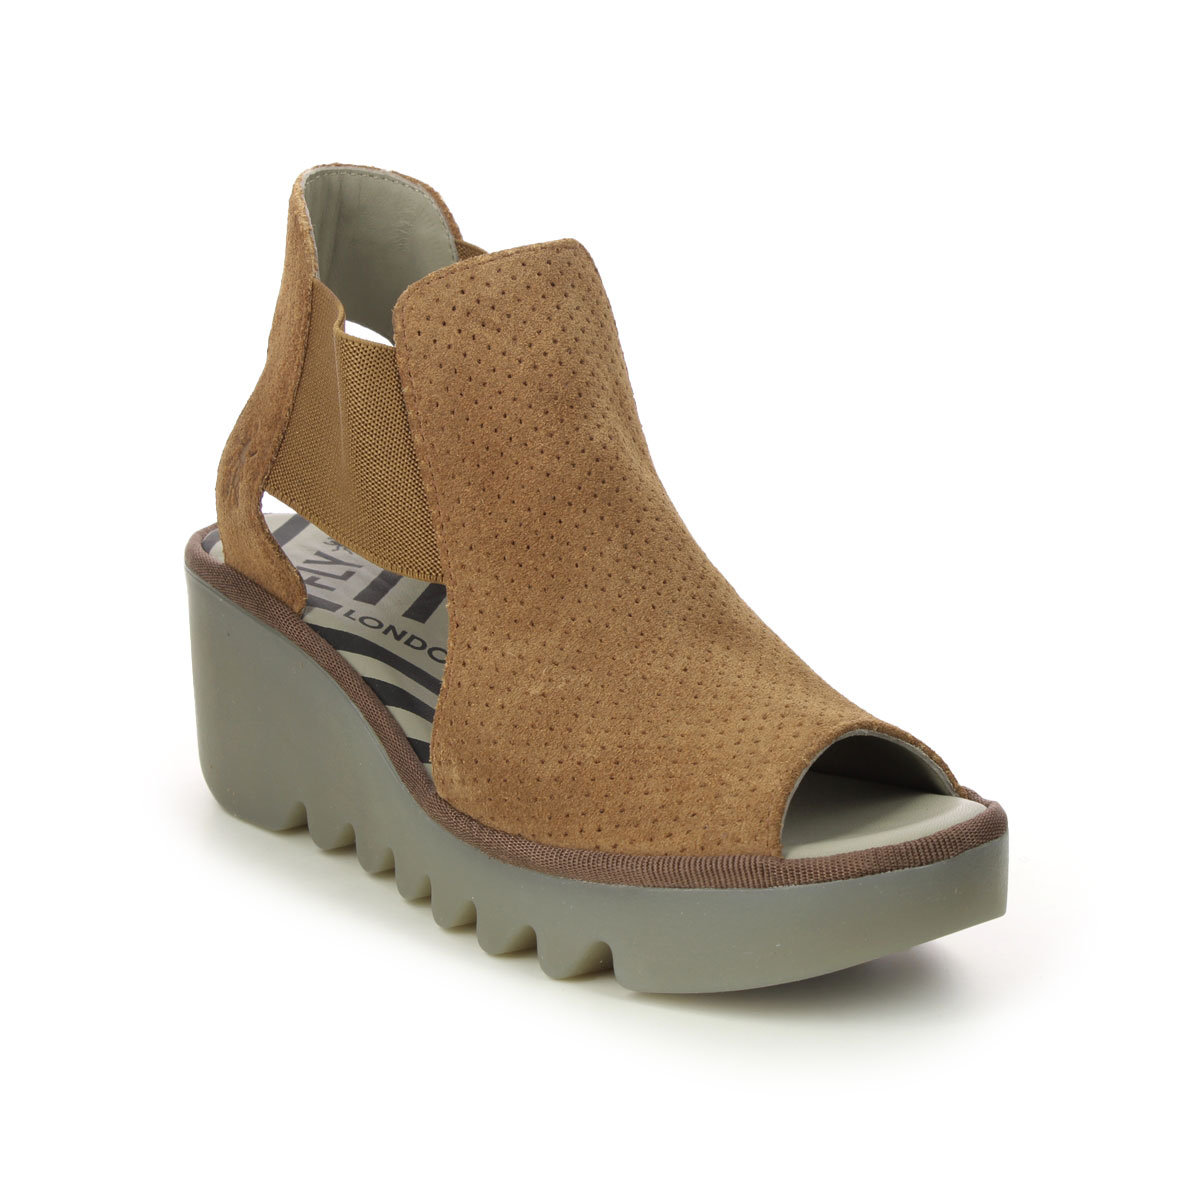 Fly London Biga  Blu Tan Suede Womens Wedge Sandals P501412-003 in a Plain Leather in Size 40